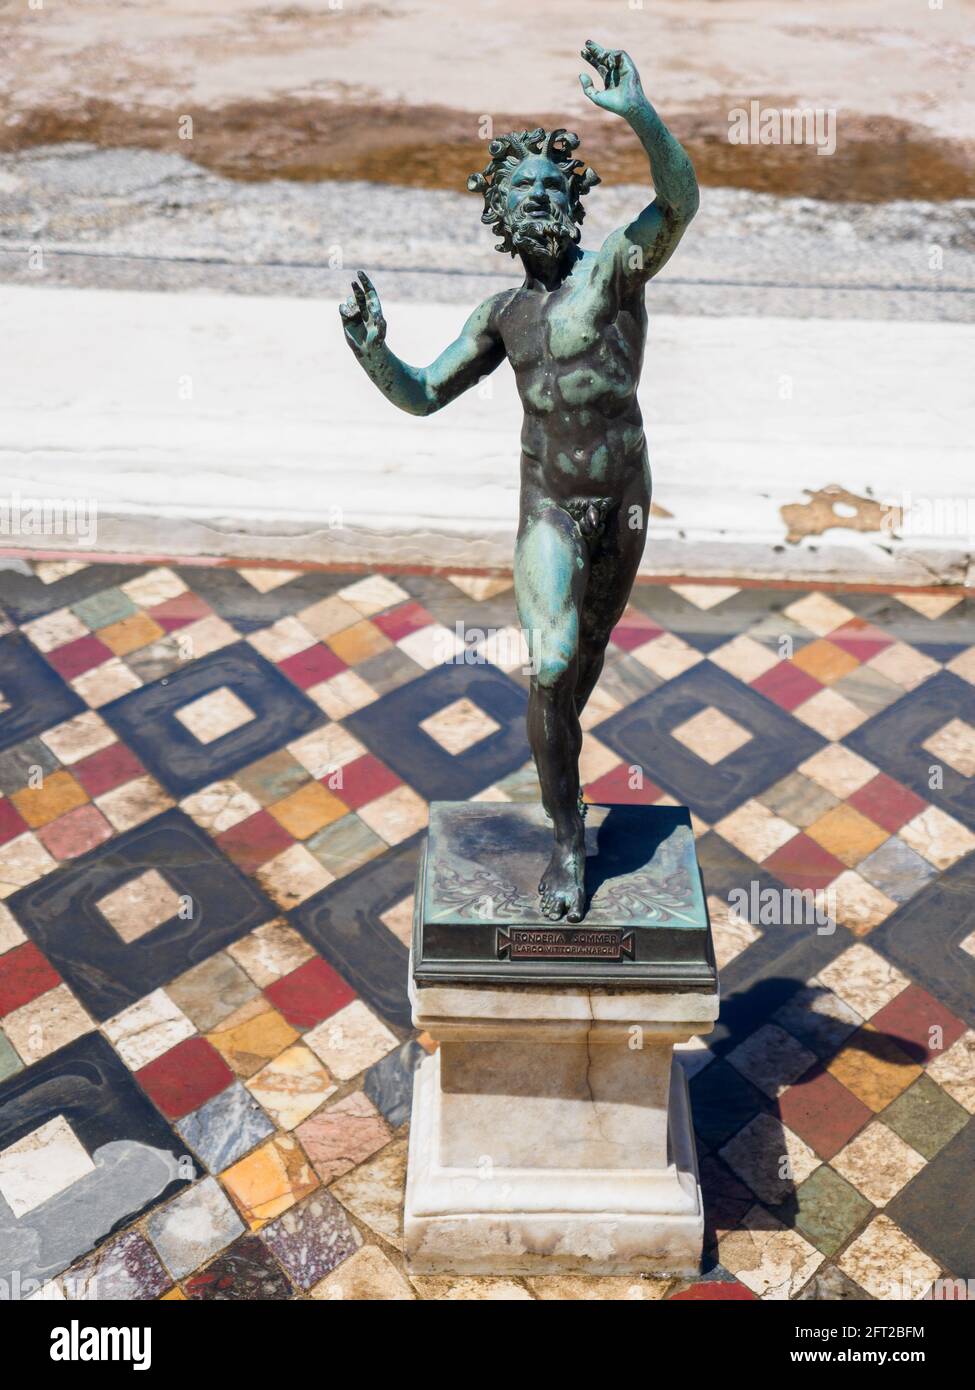 Bronze statue of a dancing faun in the House of the Faun (Casa del Fauno) - Pompeii archaeological site, Italy Stock Photo